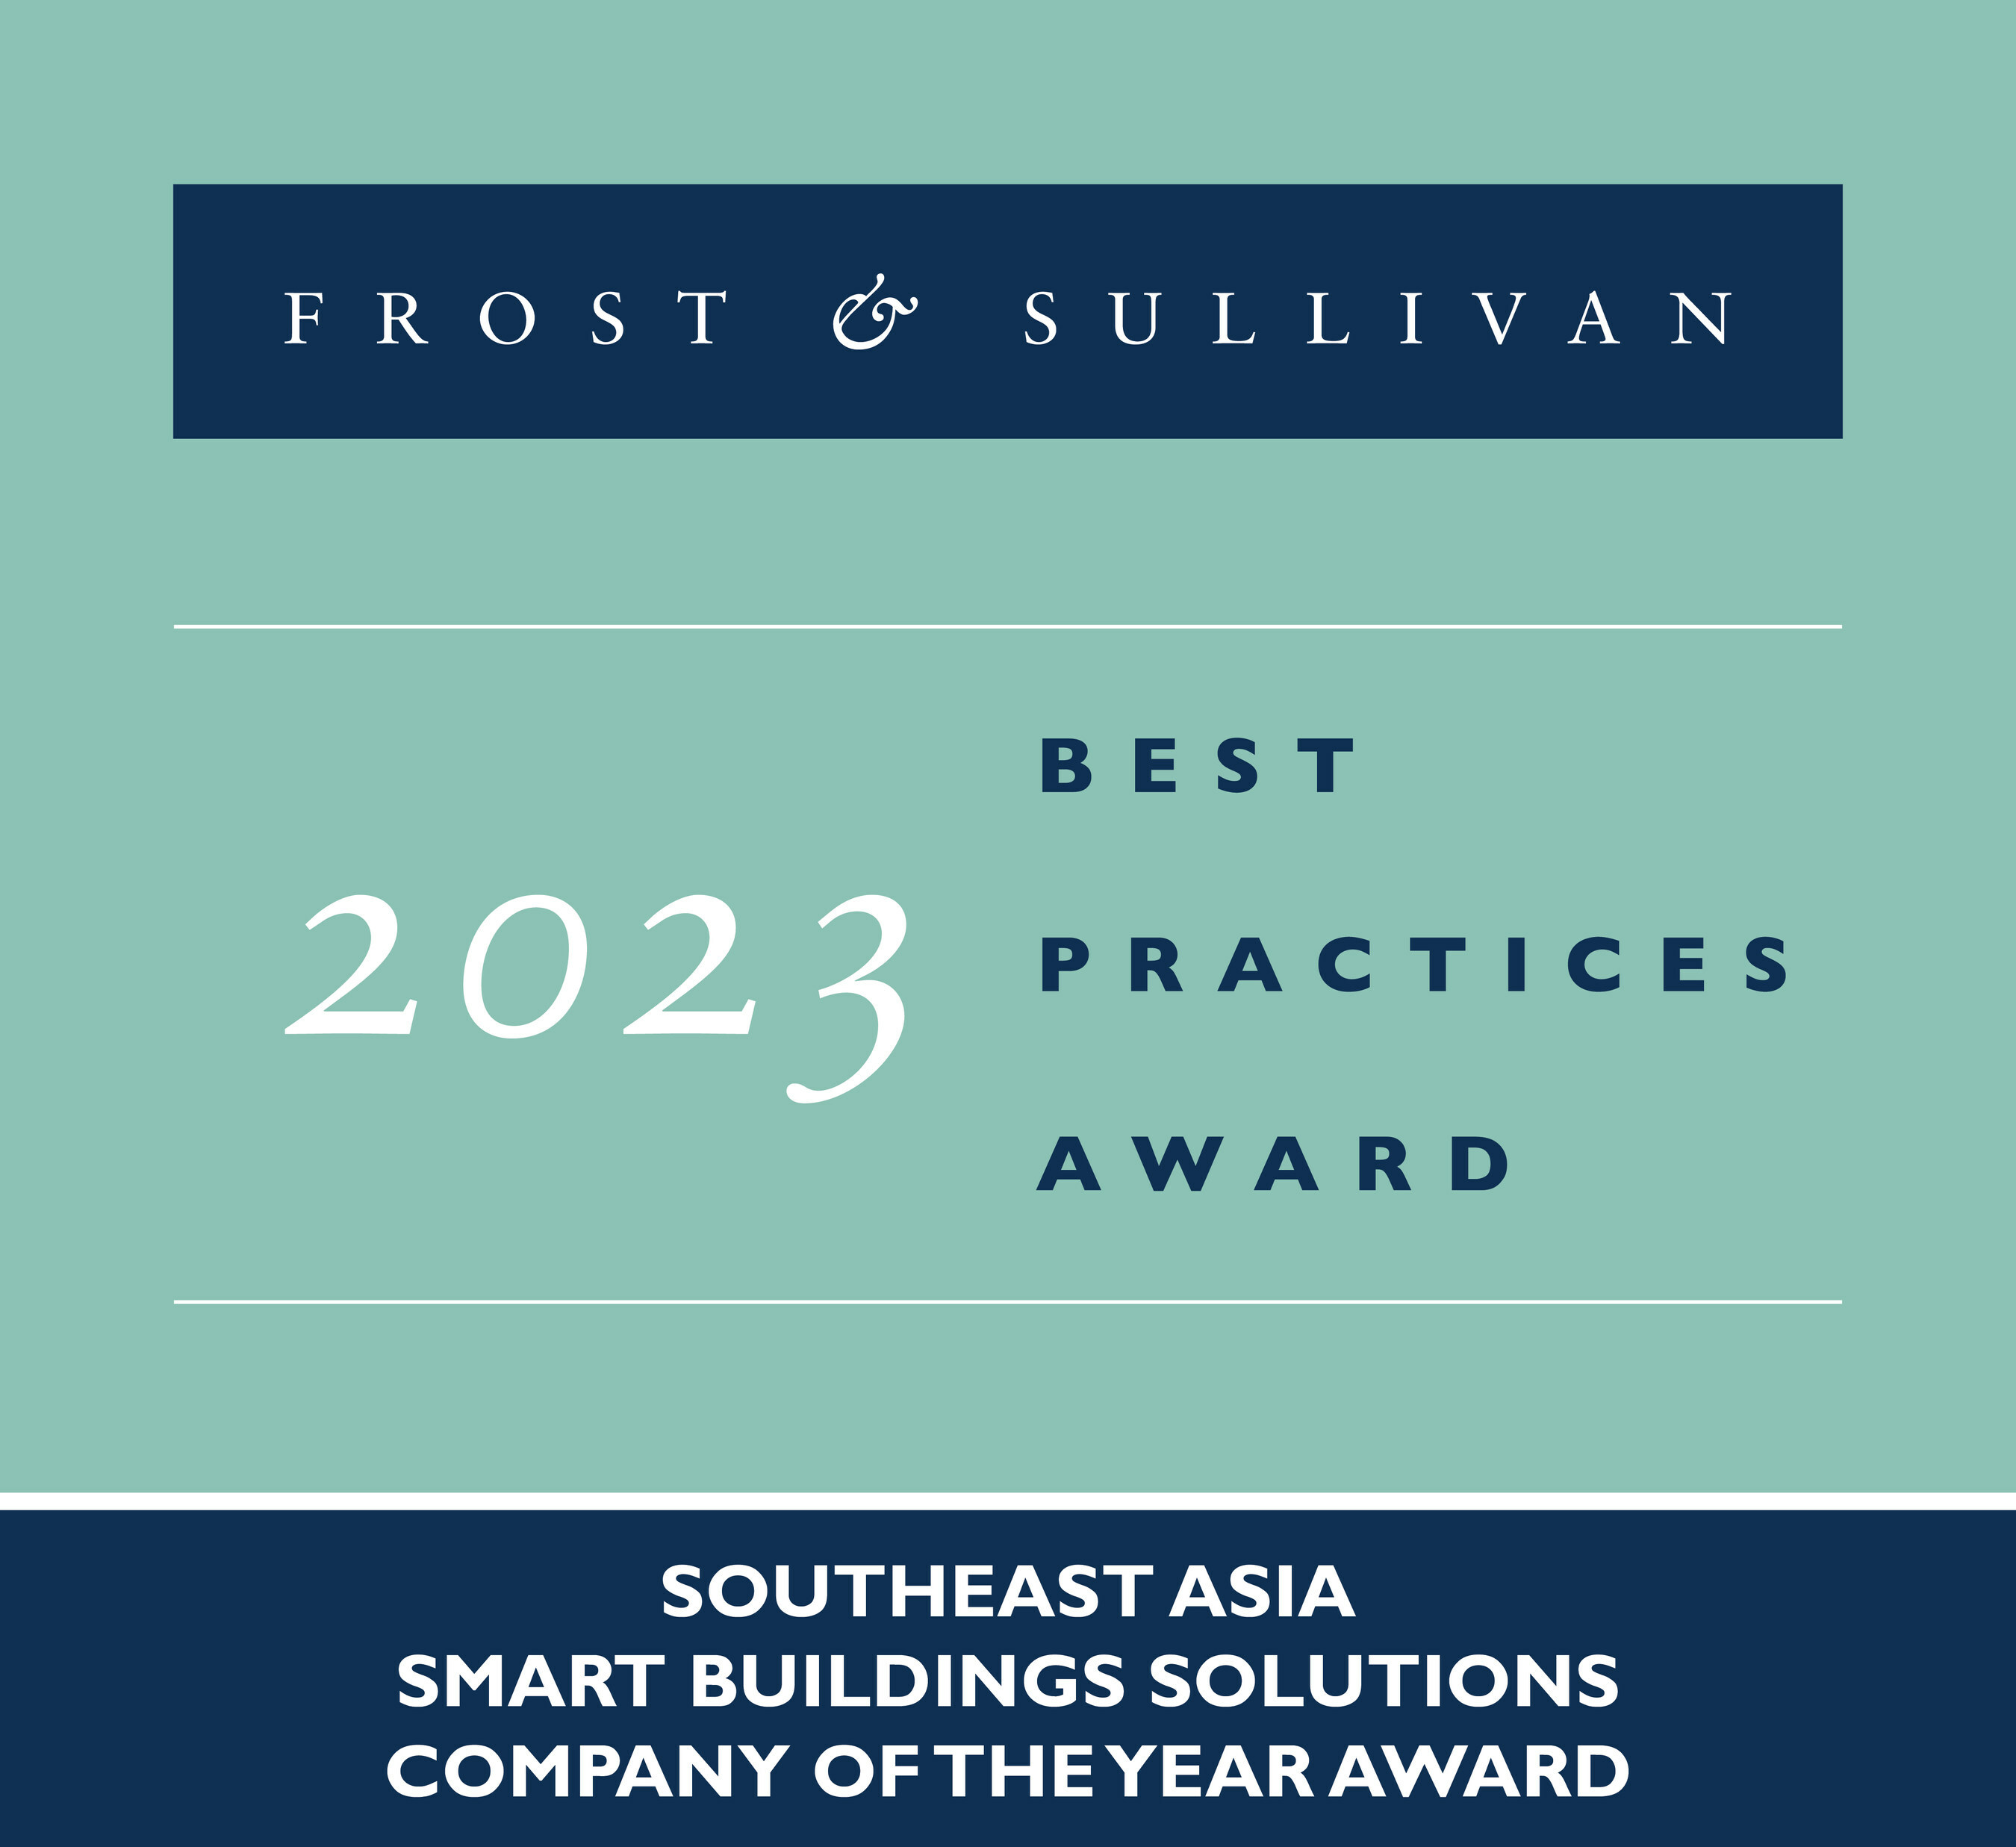 Azbil Corporation Awarded Frost & Sullivan's Southeast Asia Company of the Year Award for Delivering Groundbreaking Smart Building Solutions that Enhance Efficiency and Operational Performance